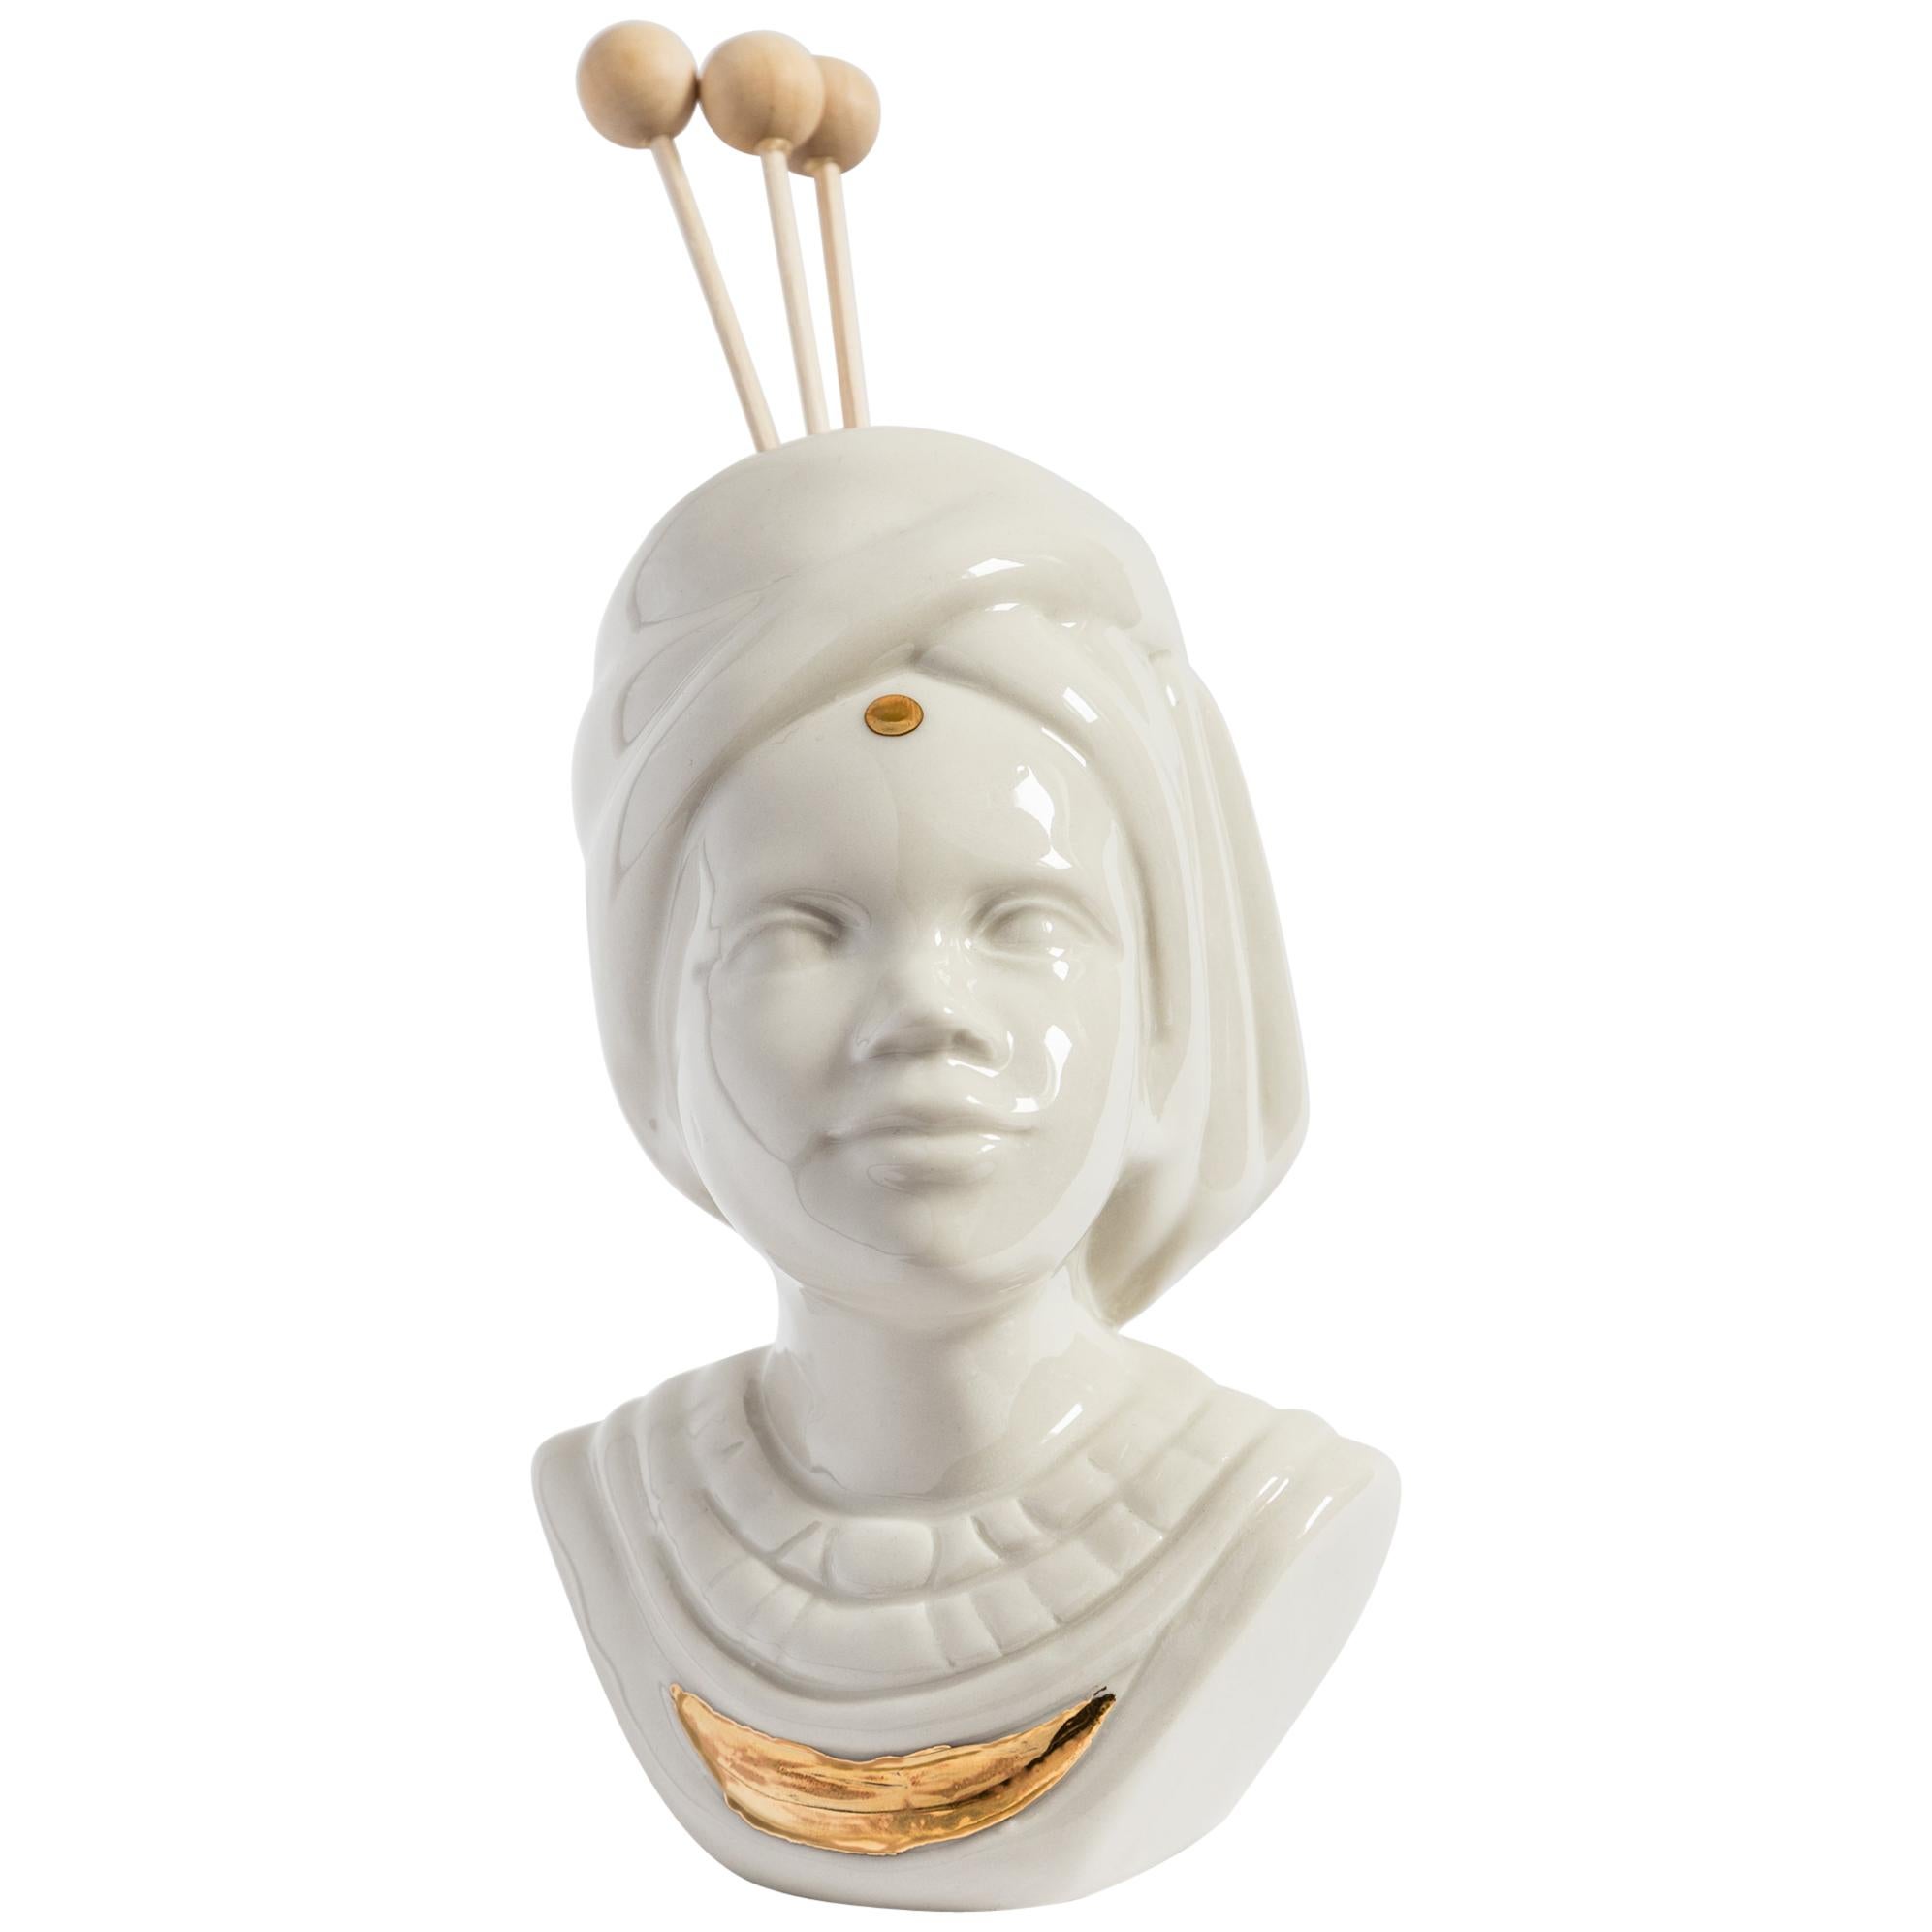 Italian Porcelain Essential Oil Diffuser, Indian Lady by Vito Nesta